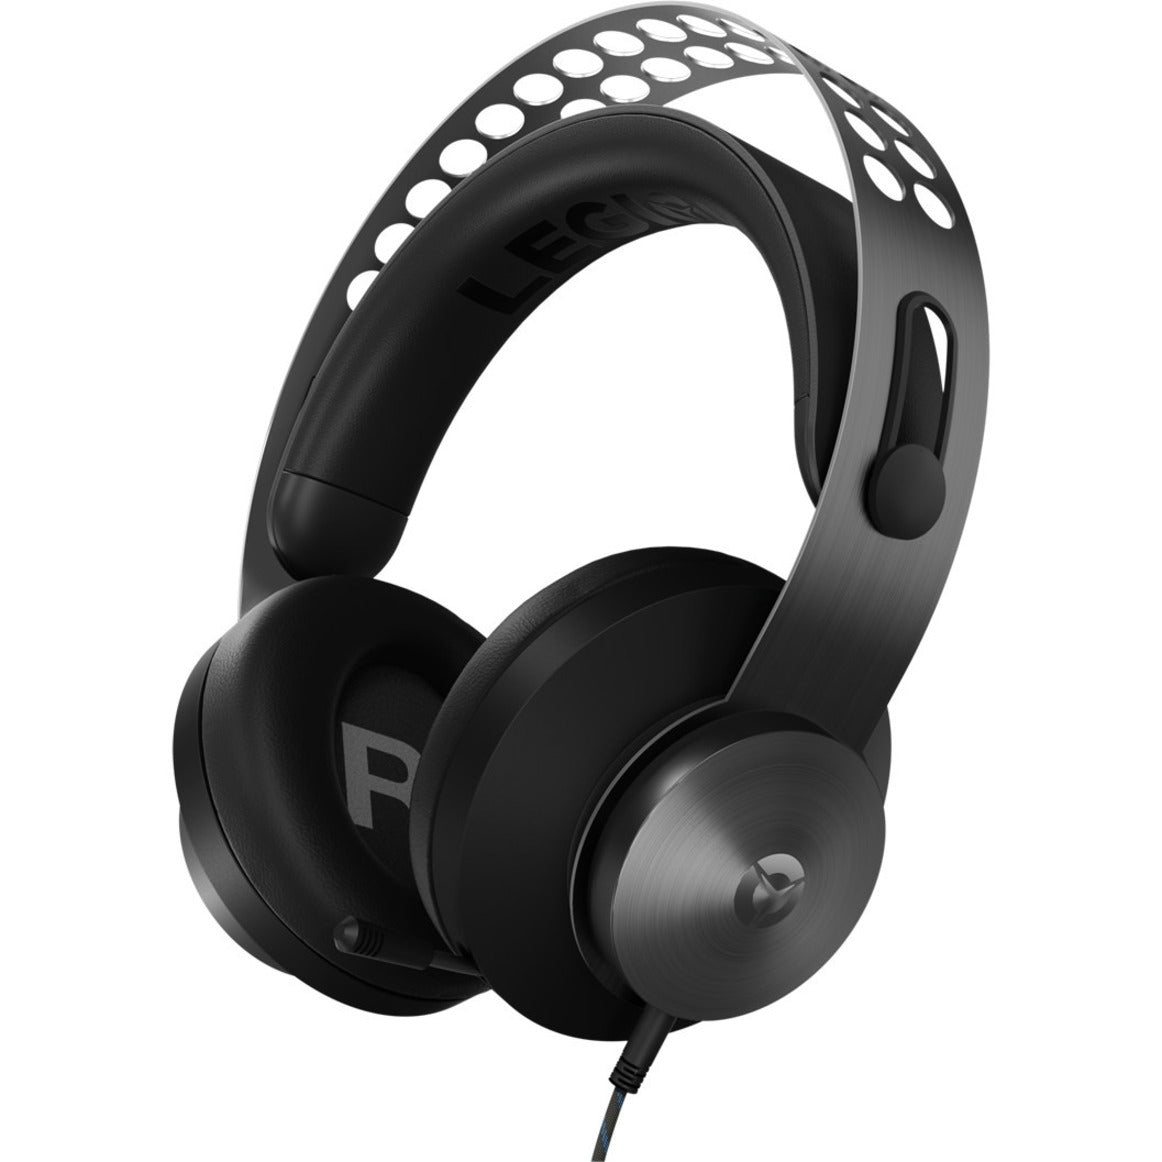 Lenovo GXD0T69864 Legion H500 Pro 7.1 Surround Sound Gaming Headset, Immersive Audio Experience, Noise Cancelling Microphone